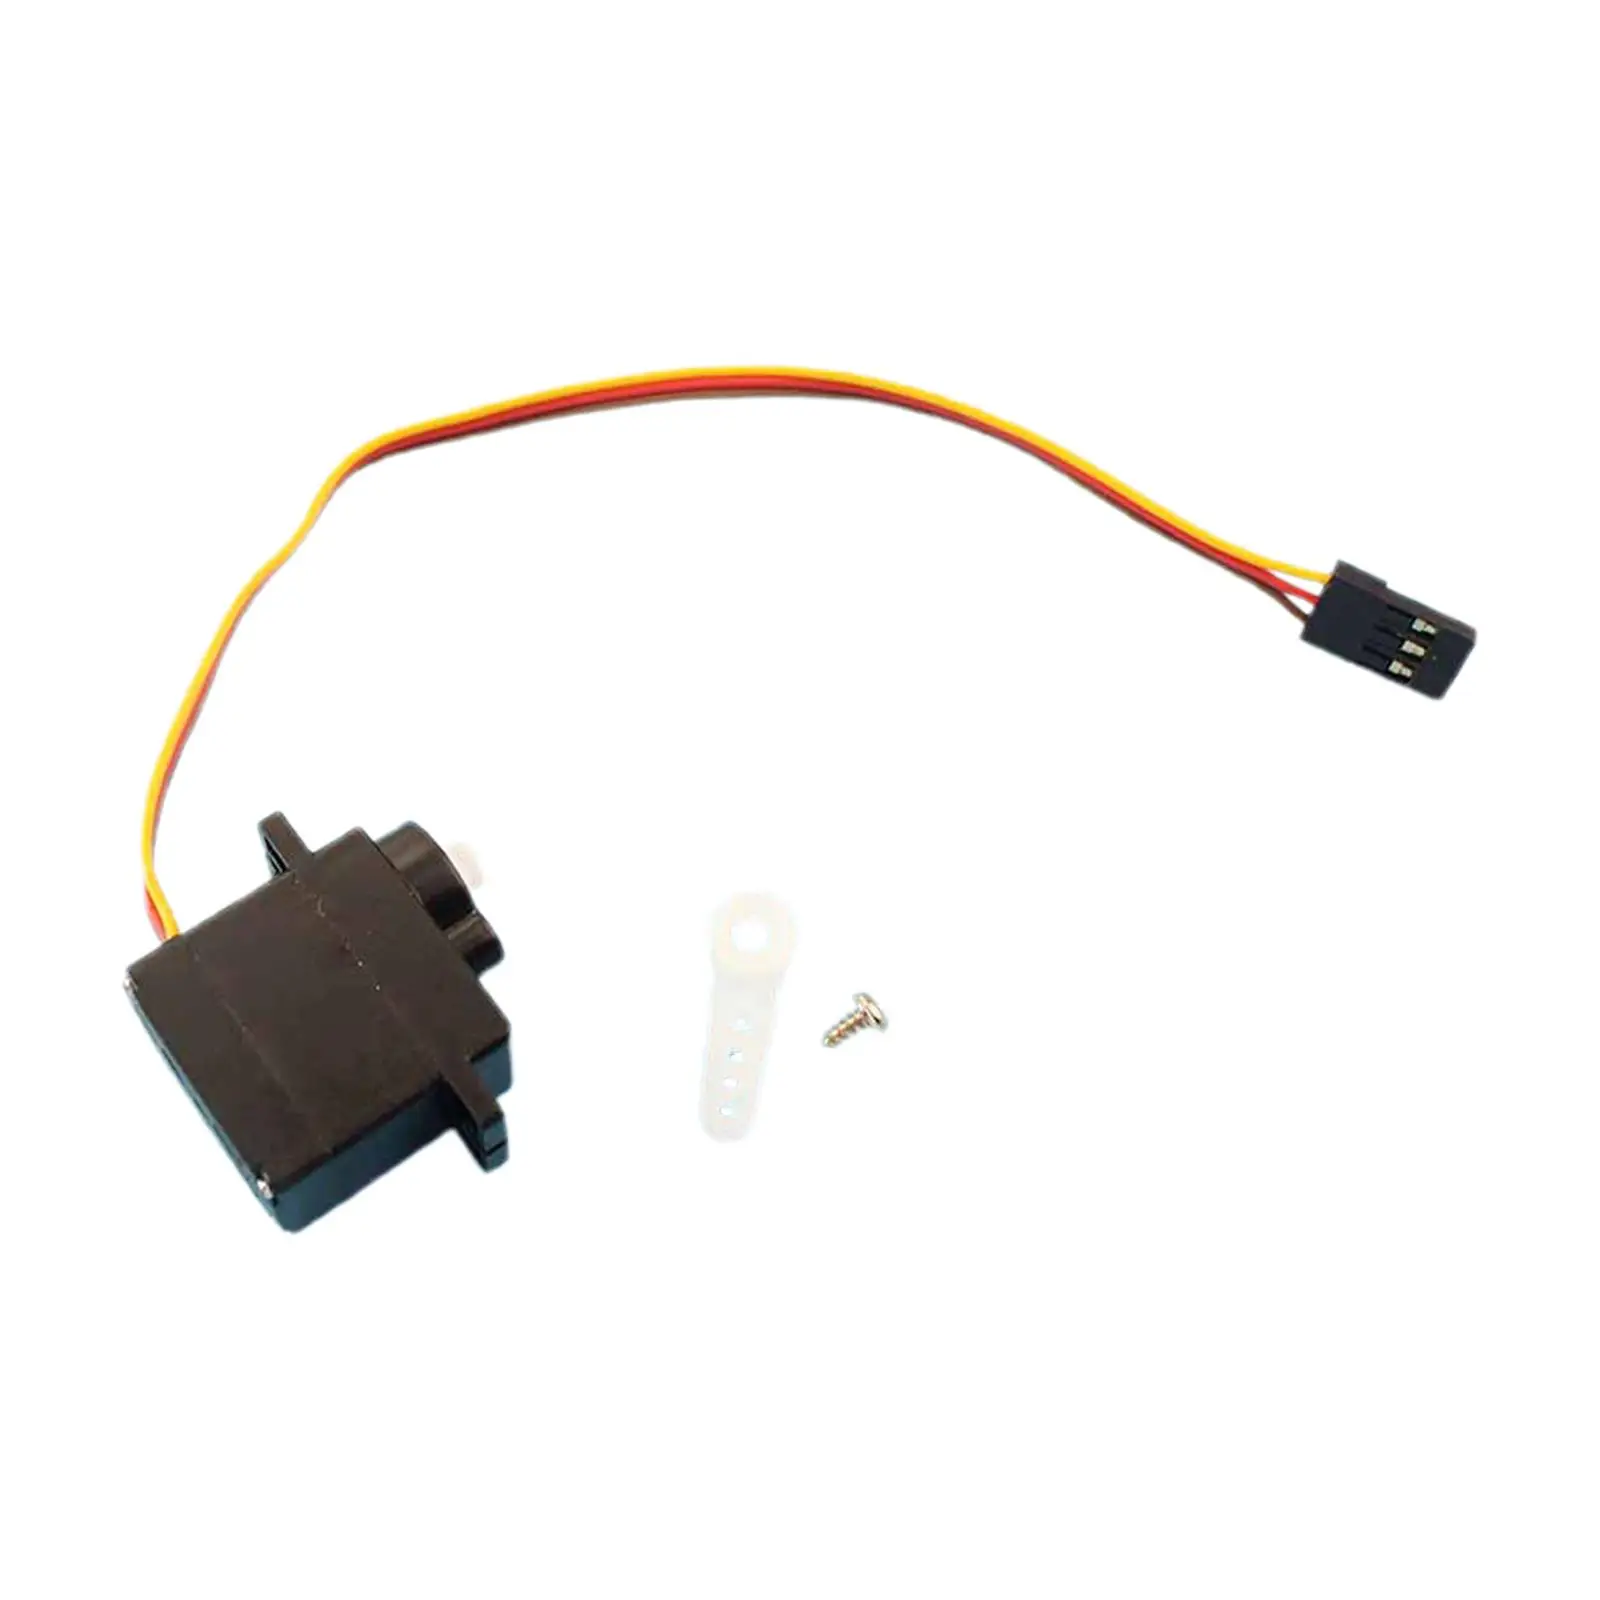 Upgrade Servo Set Parts with Servo Arm for V912-A RC Glider Plane Accessory Replacement DIY Modification